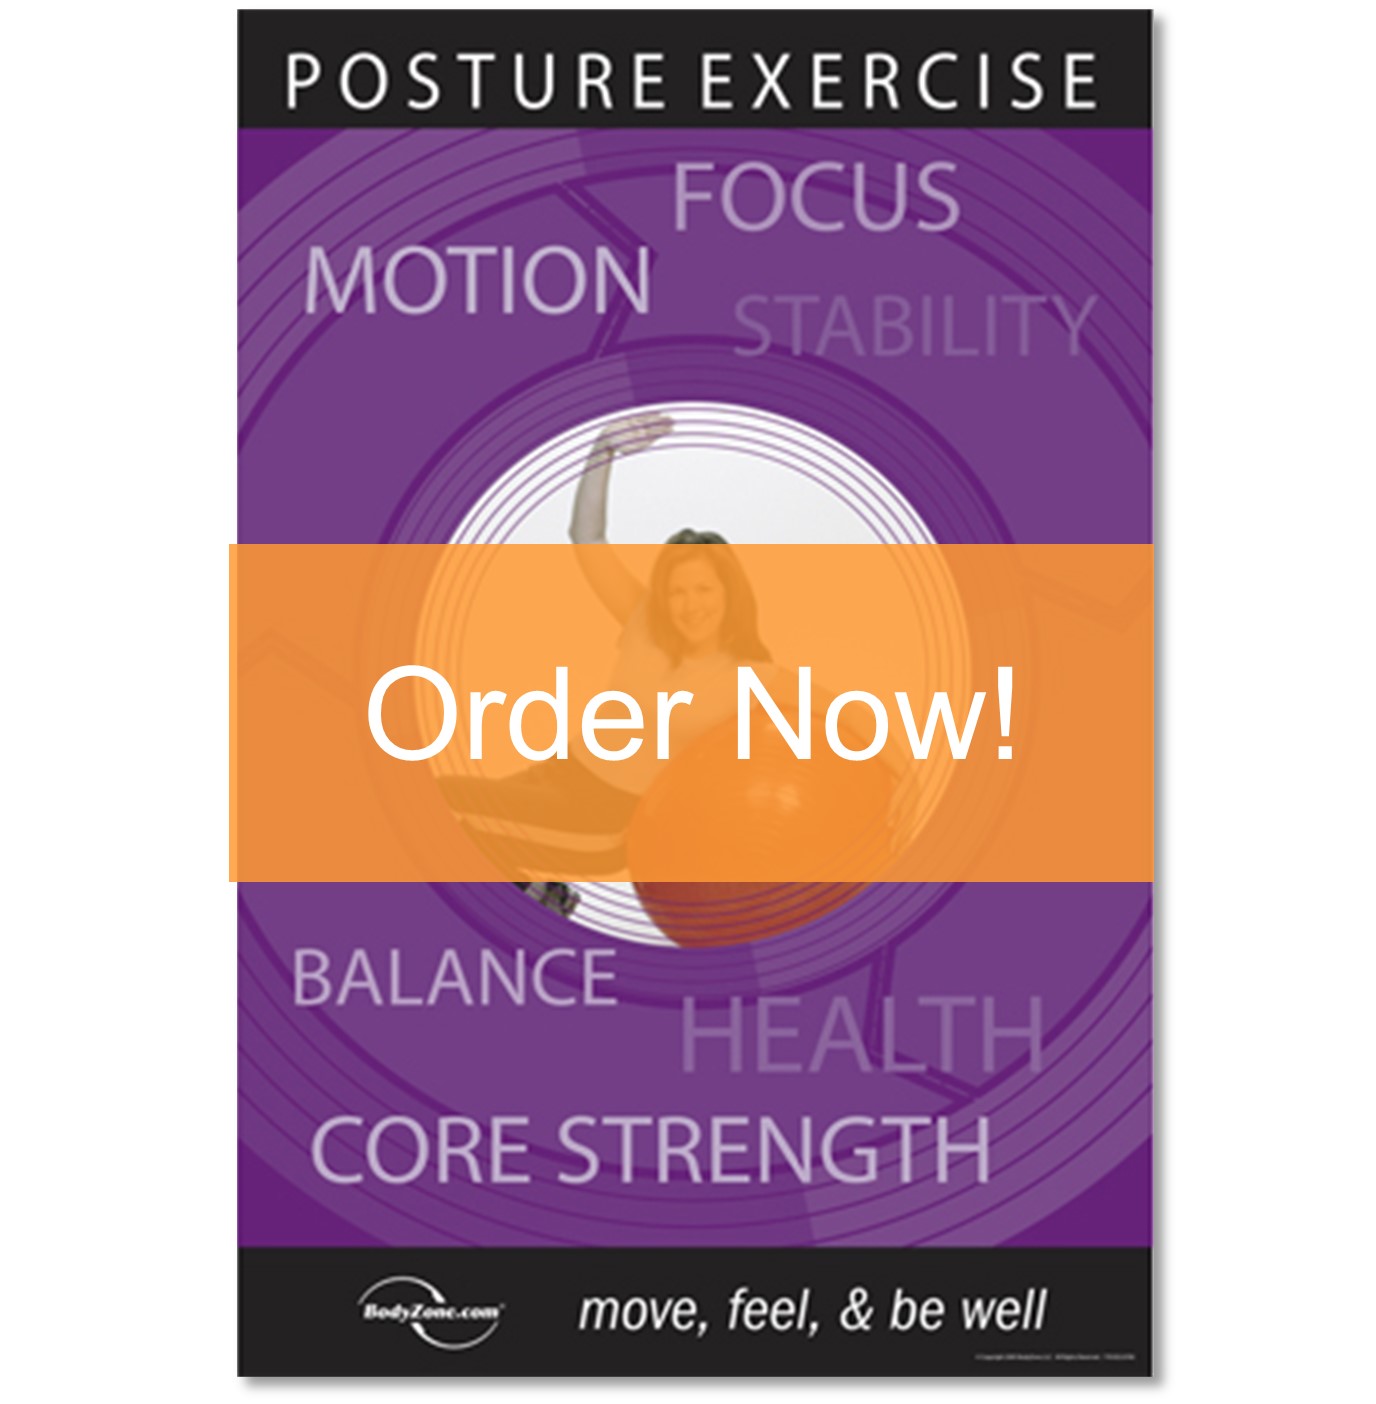 Posture Exercise Poster